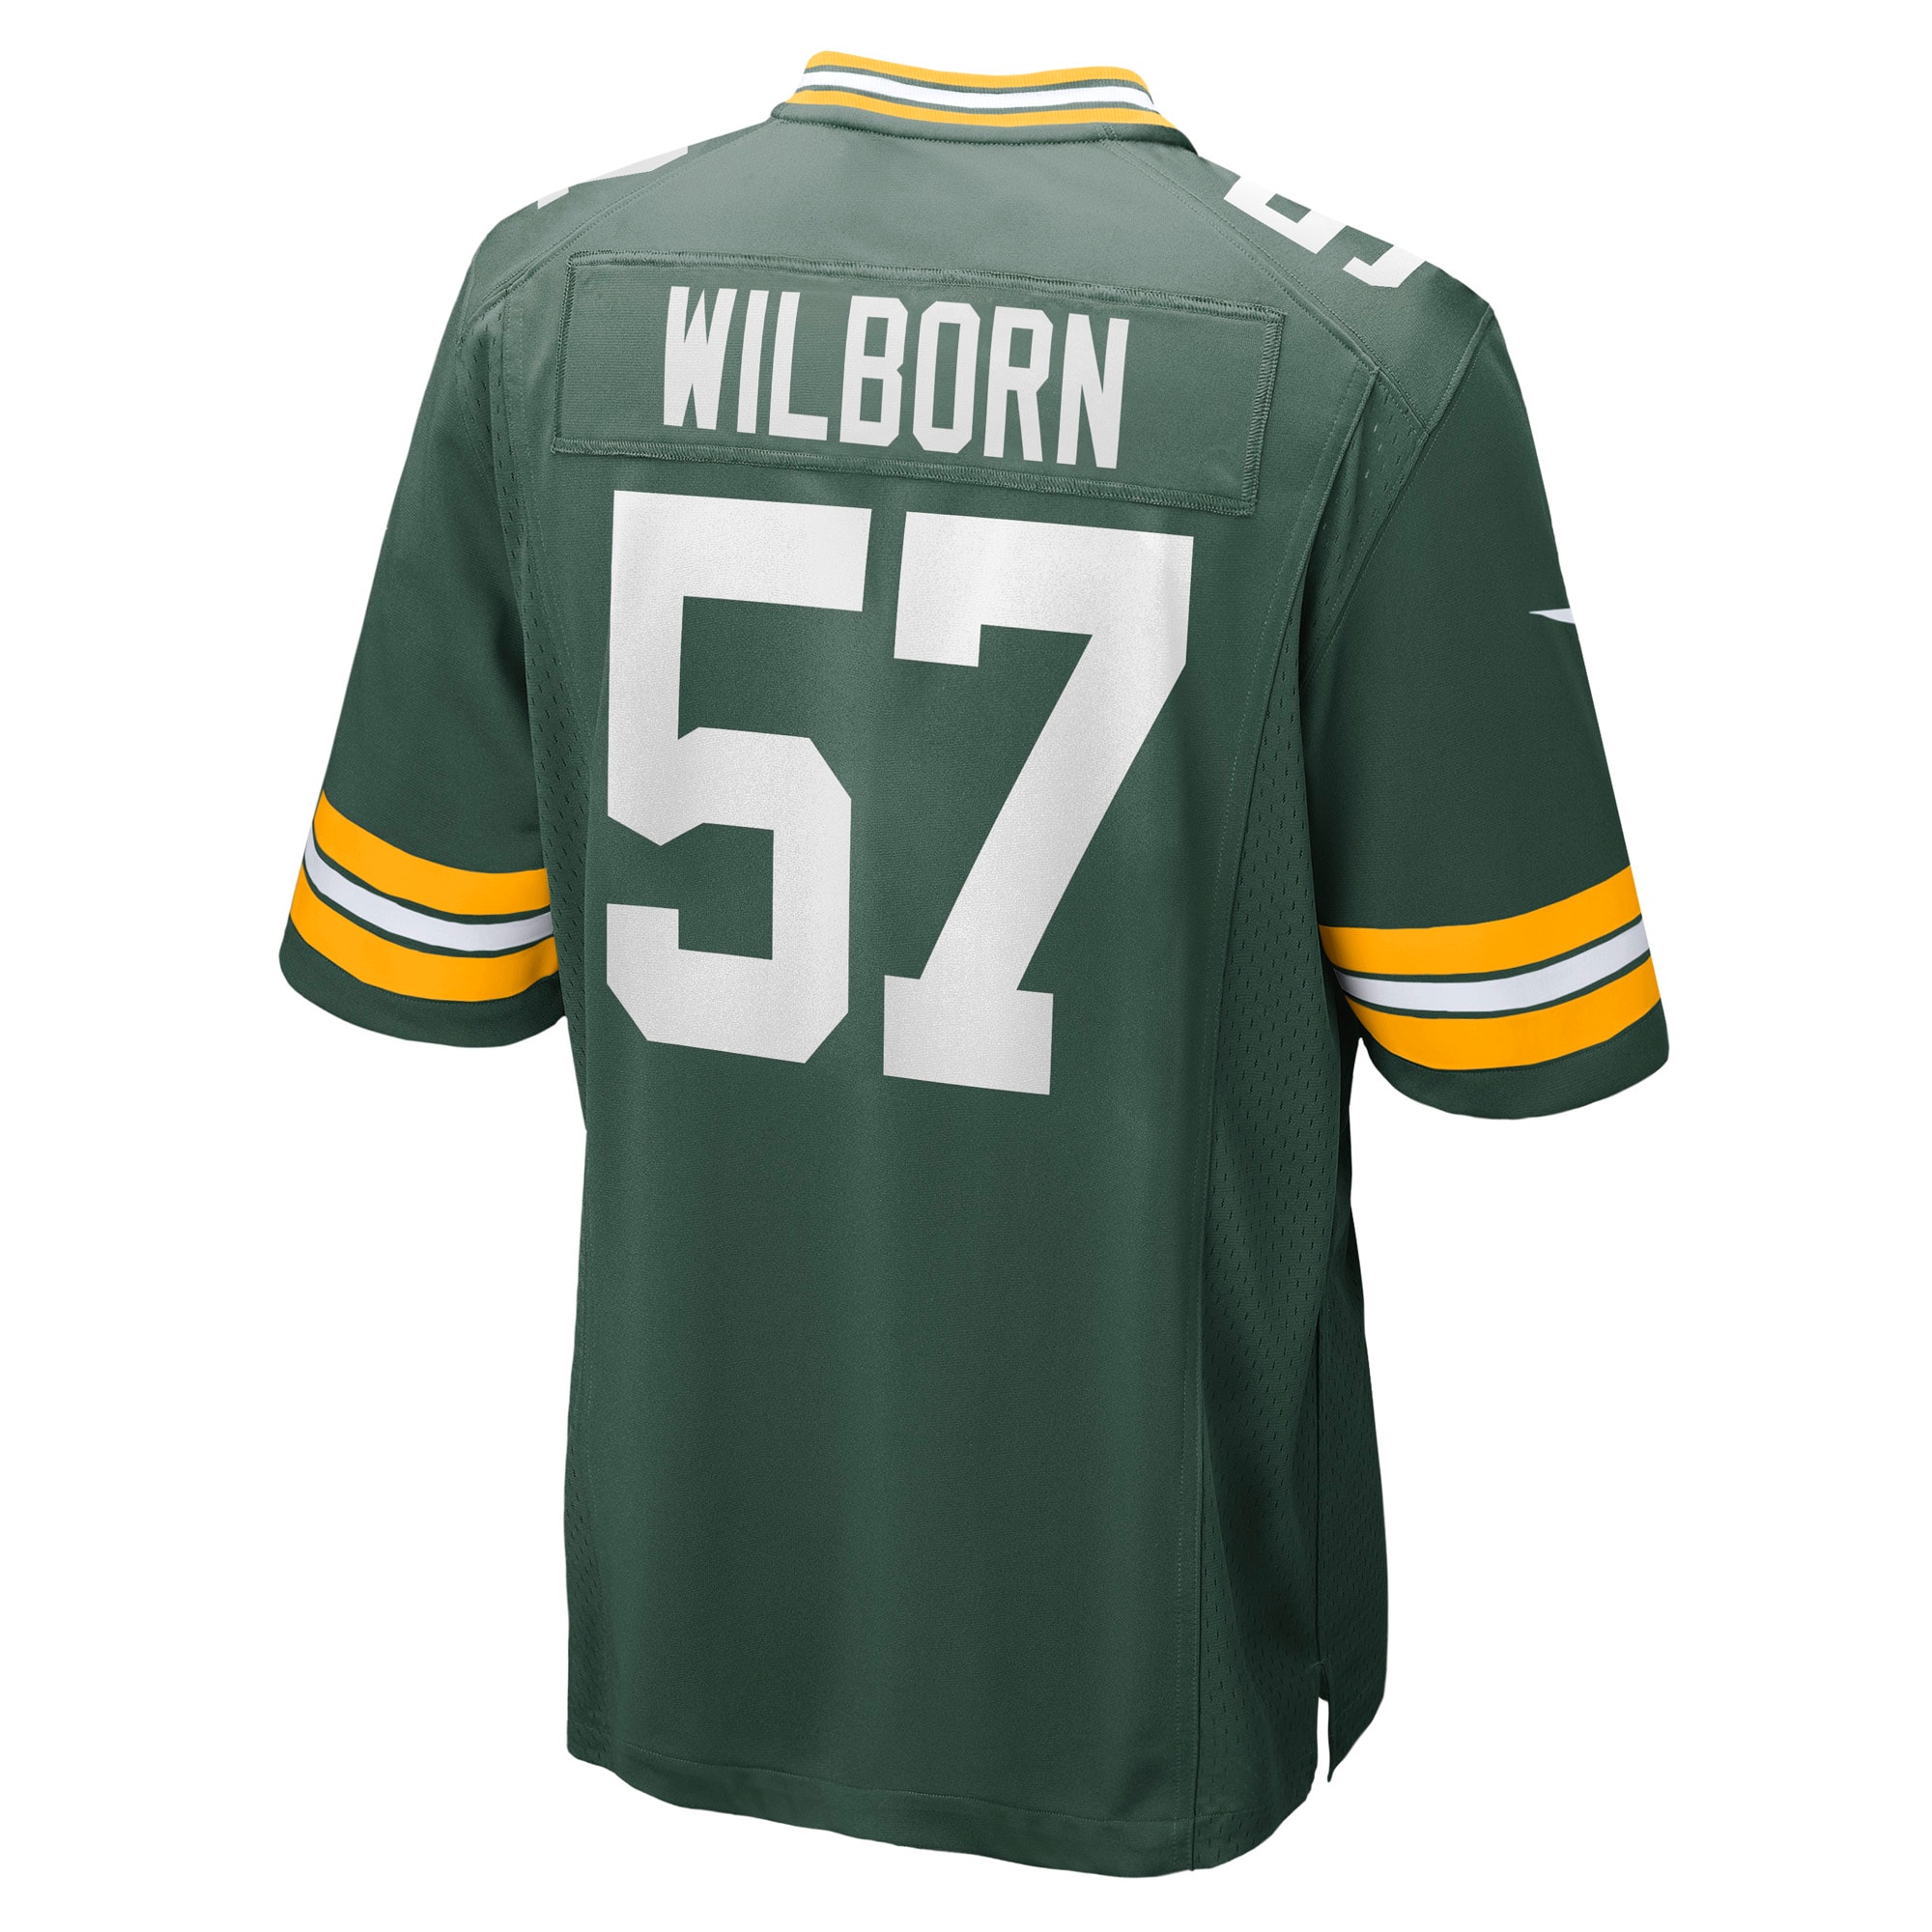 Men's Green Bay Packers Jerseys Green Ray Wilborn Game Style